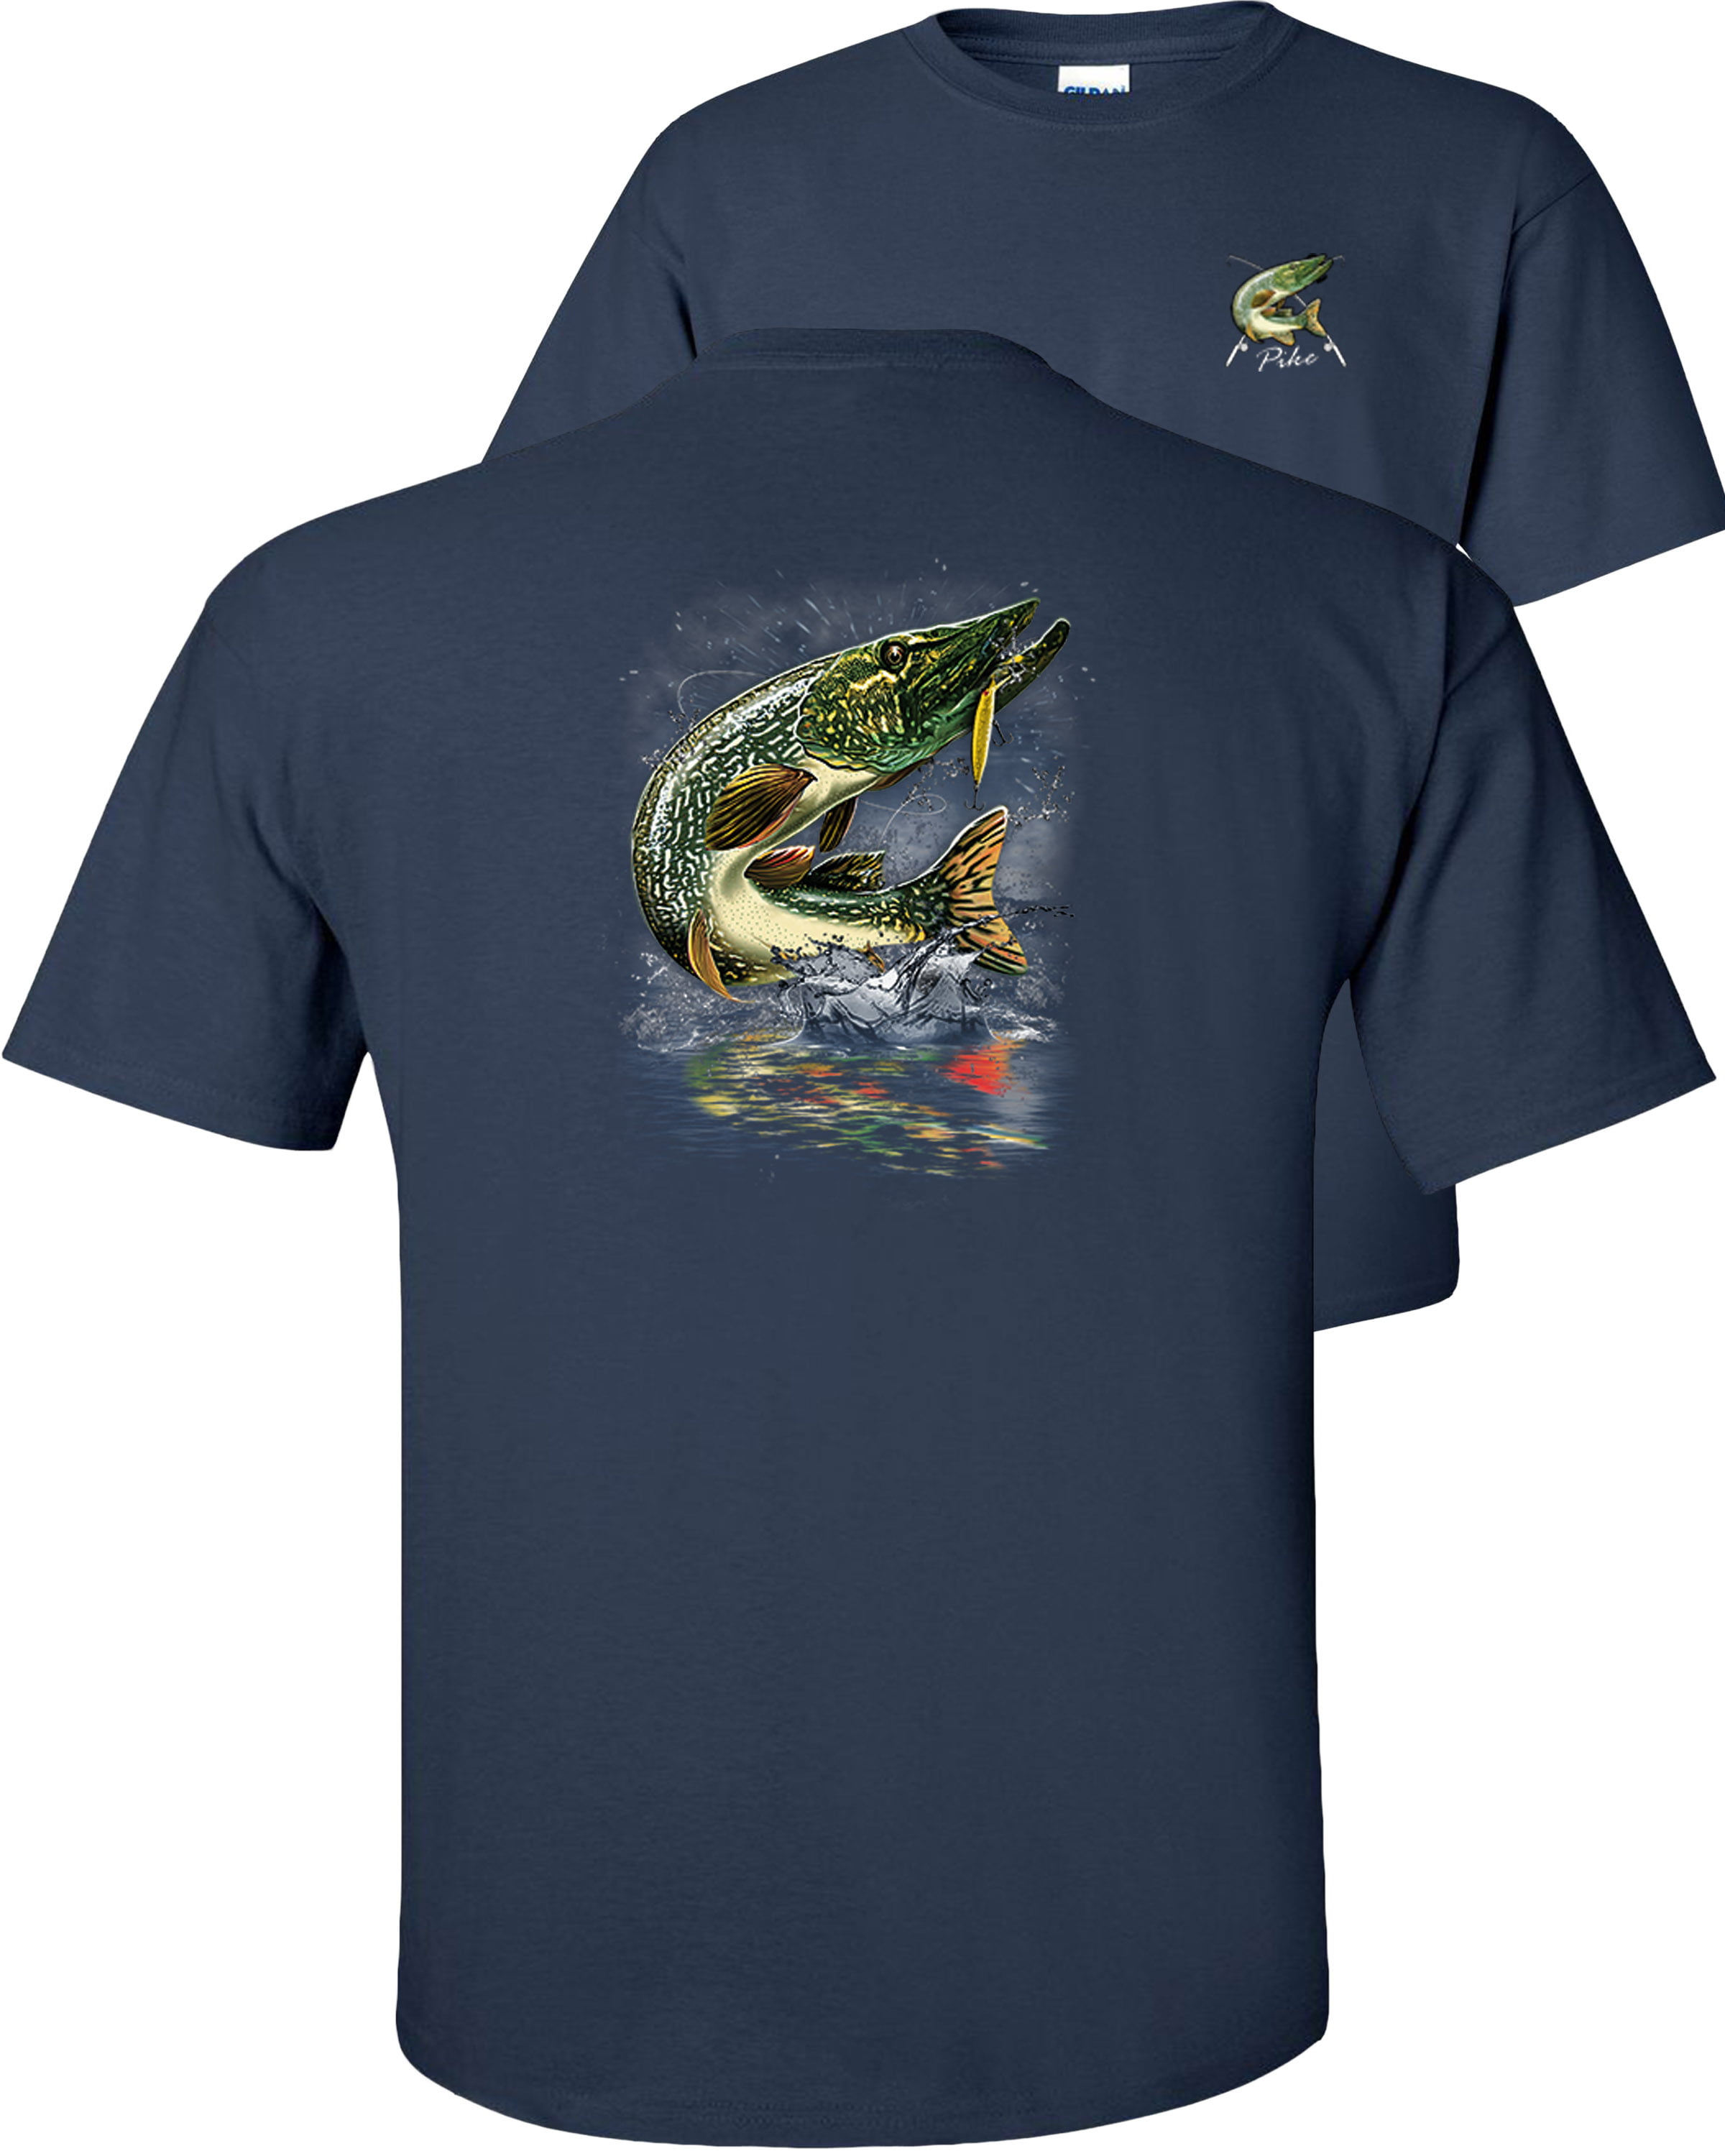 Fair Game - Jumping Northern Pike Fishing T-Shirt Adult Youth Unisex ...